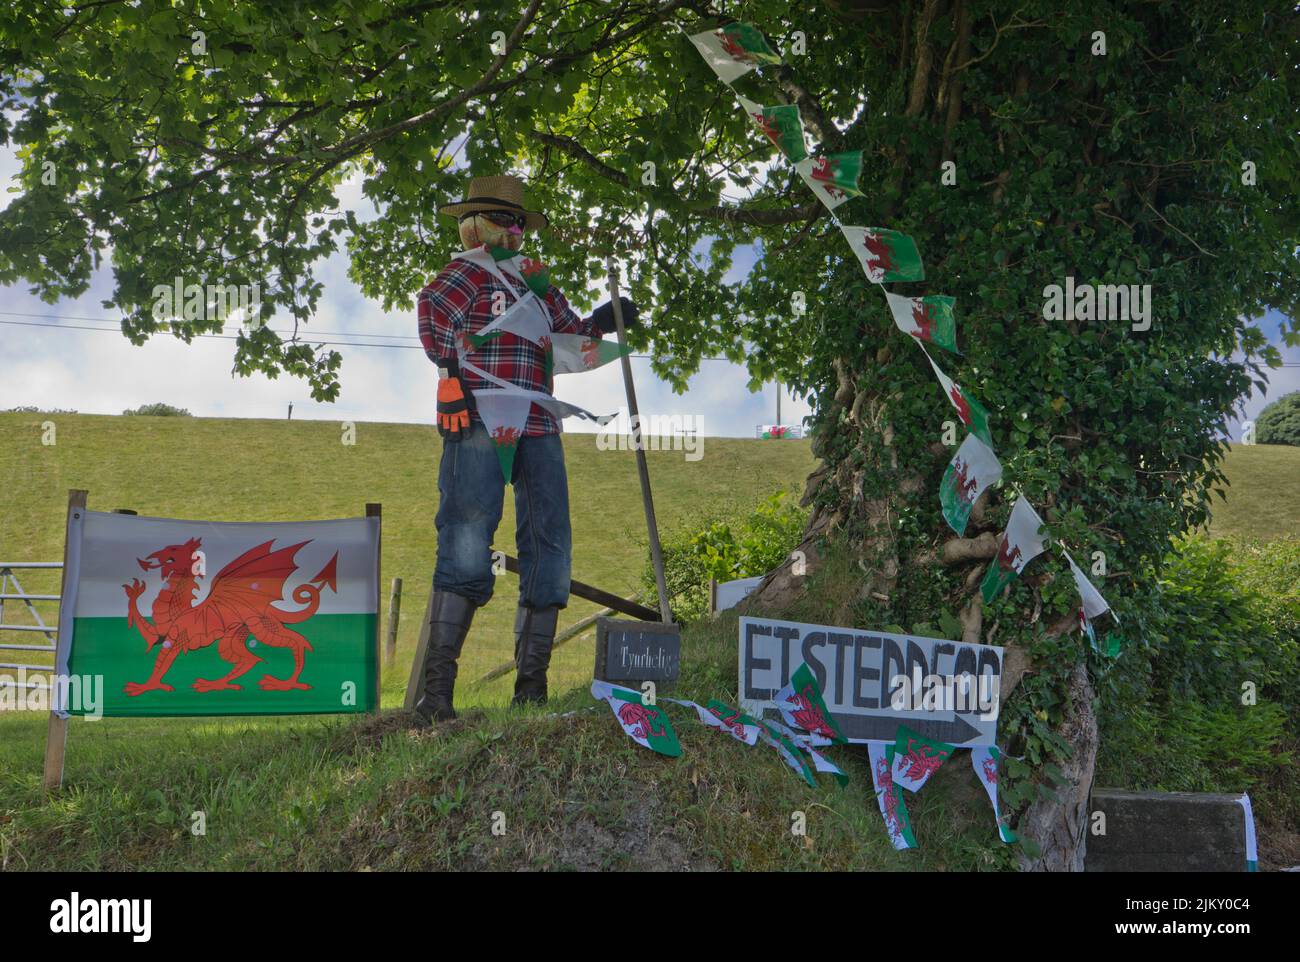 Local villages display Welsh flags and banners during the National Eisteddfod festival of Welsh culture and traditions in Tregaron,Ceredigion,Wales,UK Stock Photo